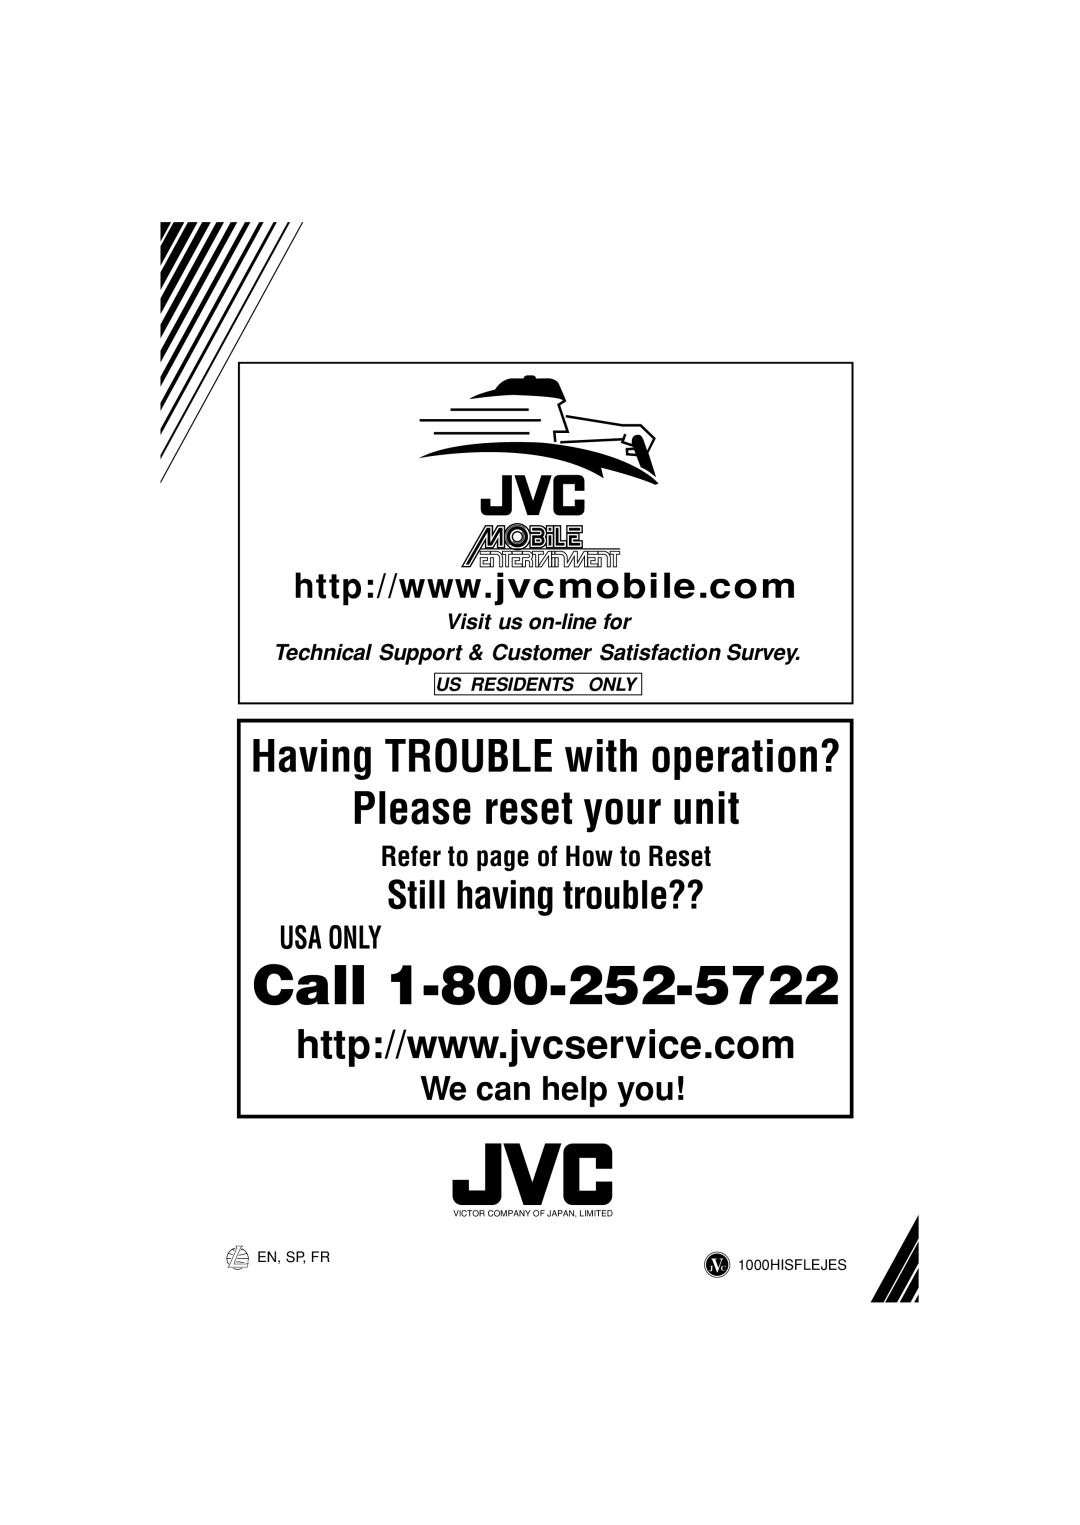 JVC KD-S670 Refer to page of How to Reset, Visit us on-linefor, Technical Support & Customer Satisfaction Survey, Call 